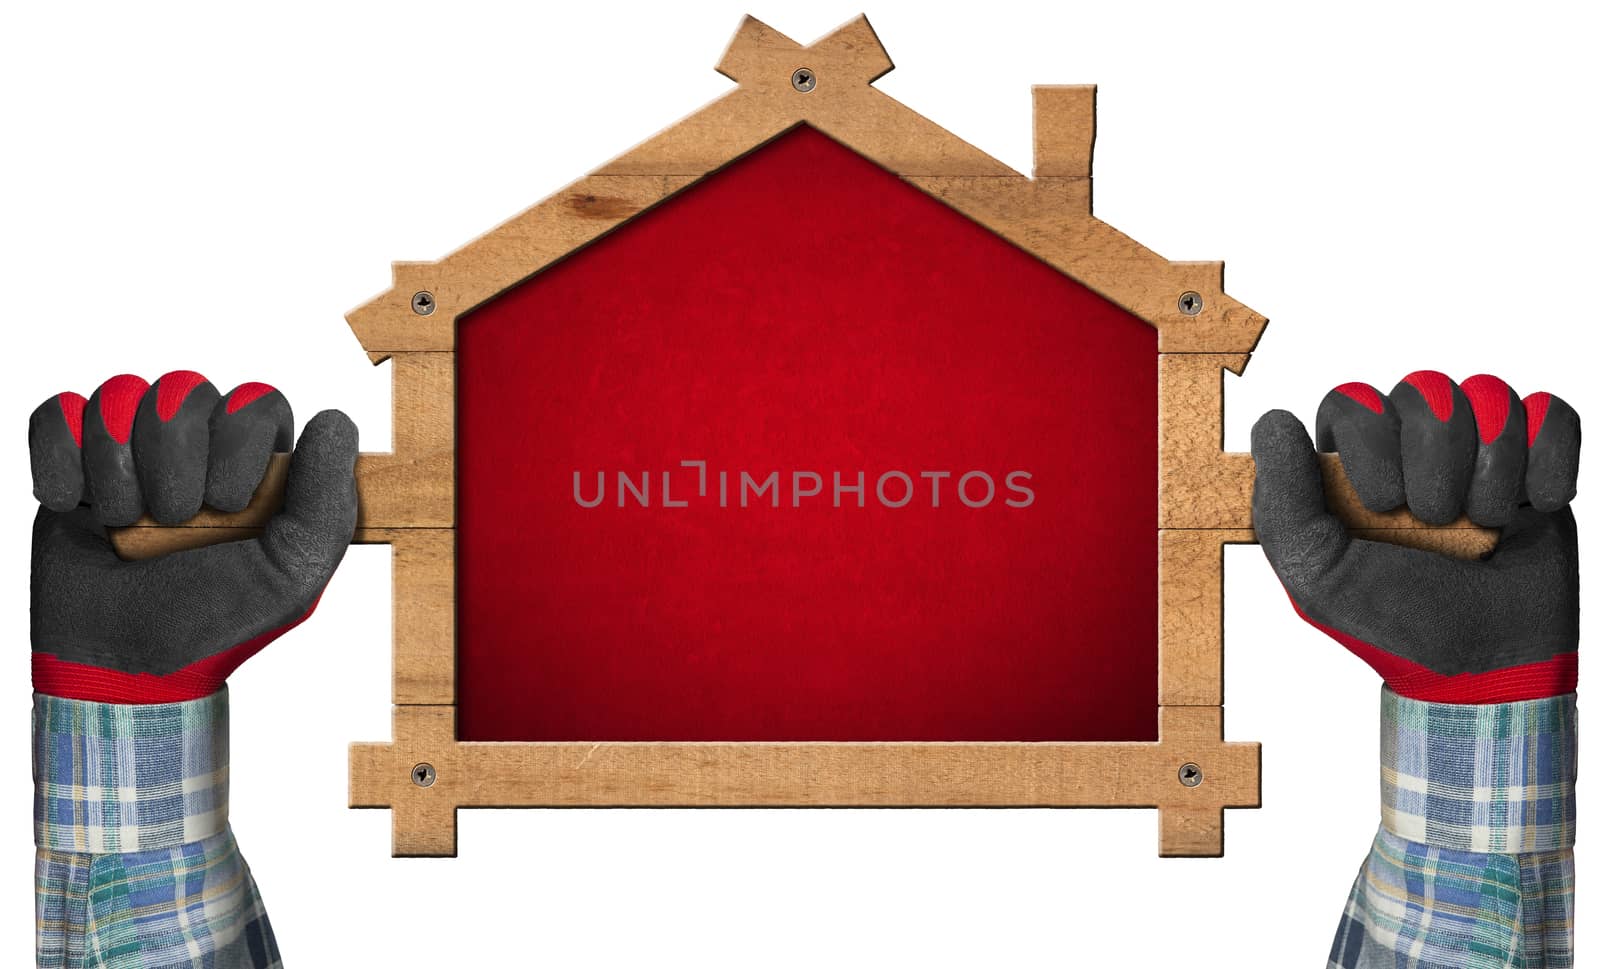 Hands with work gloves holding a wooden sign in the shape of house, isolated on white background.